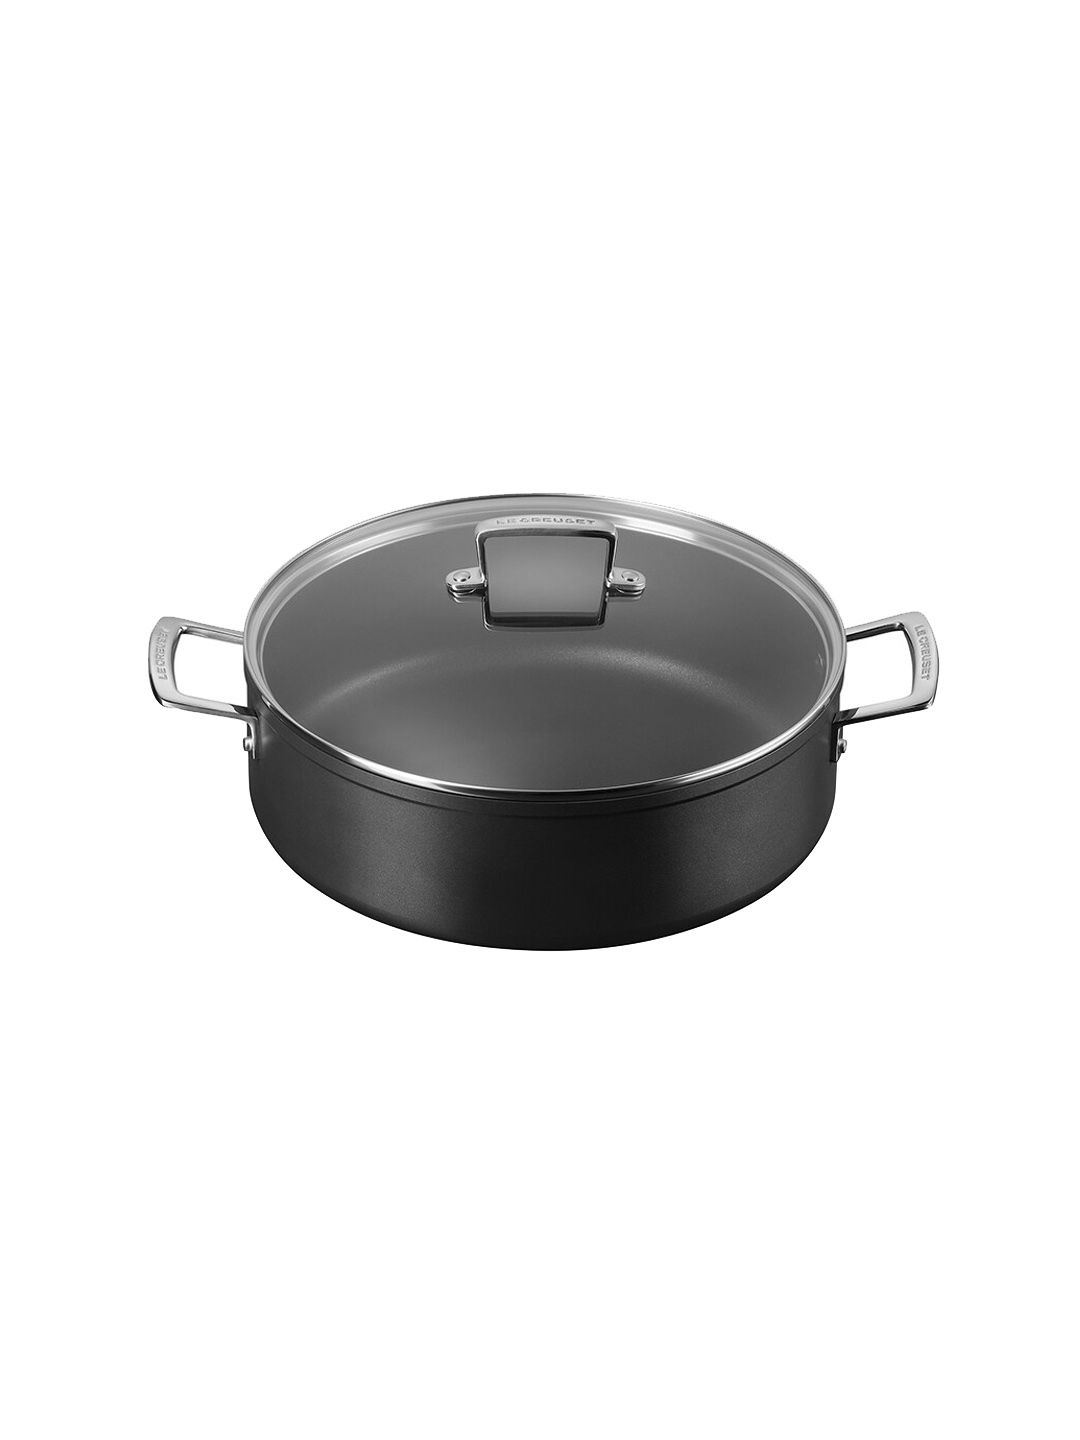 LE CREUSET Black Induction Base Stainless Steel Saute Pan Price in India